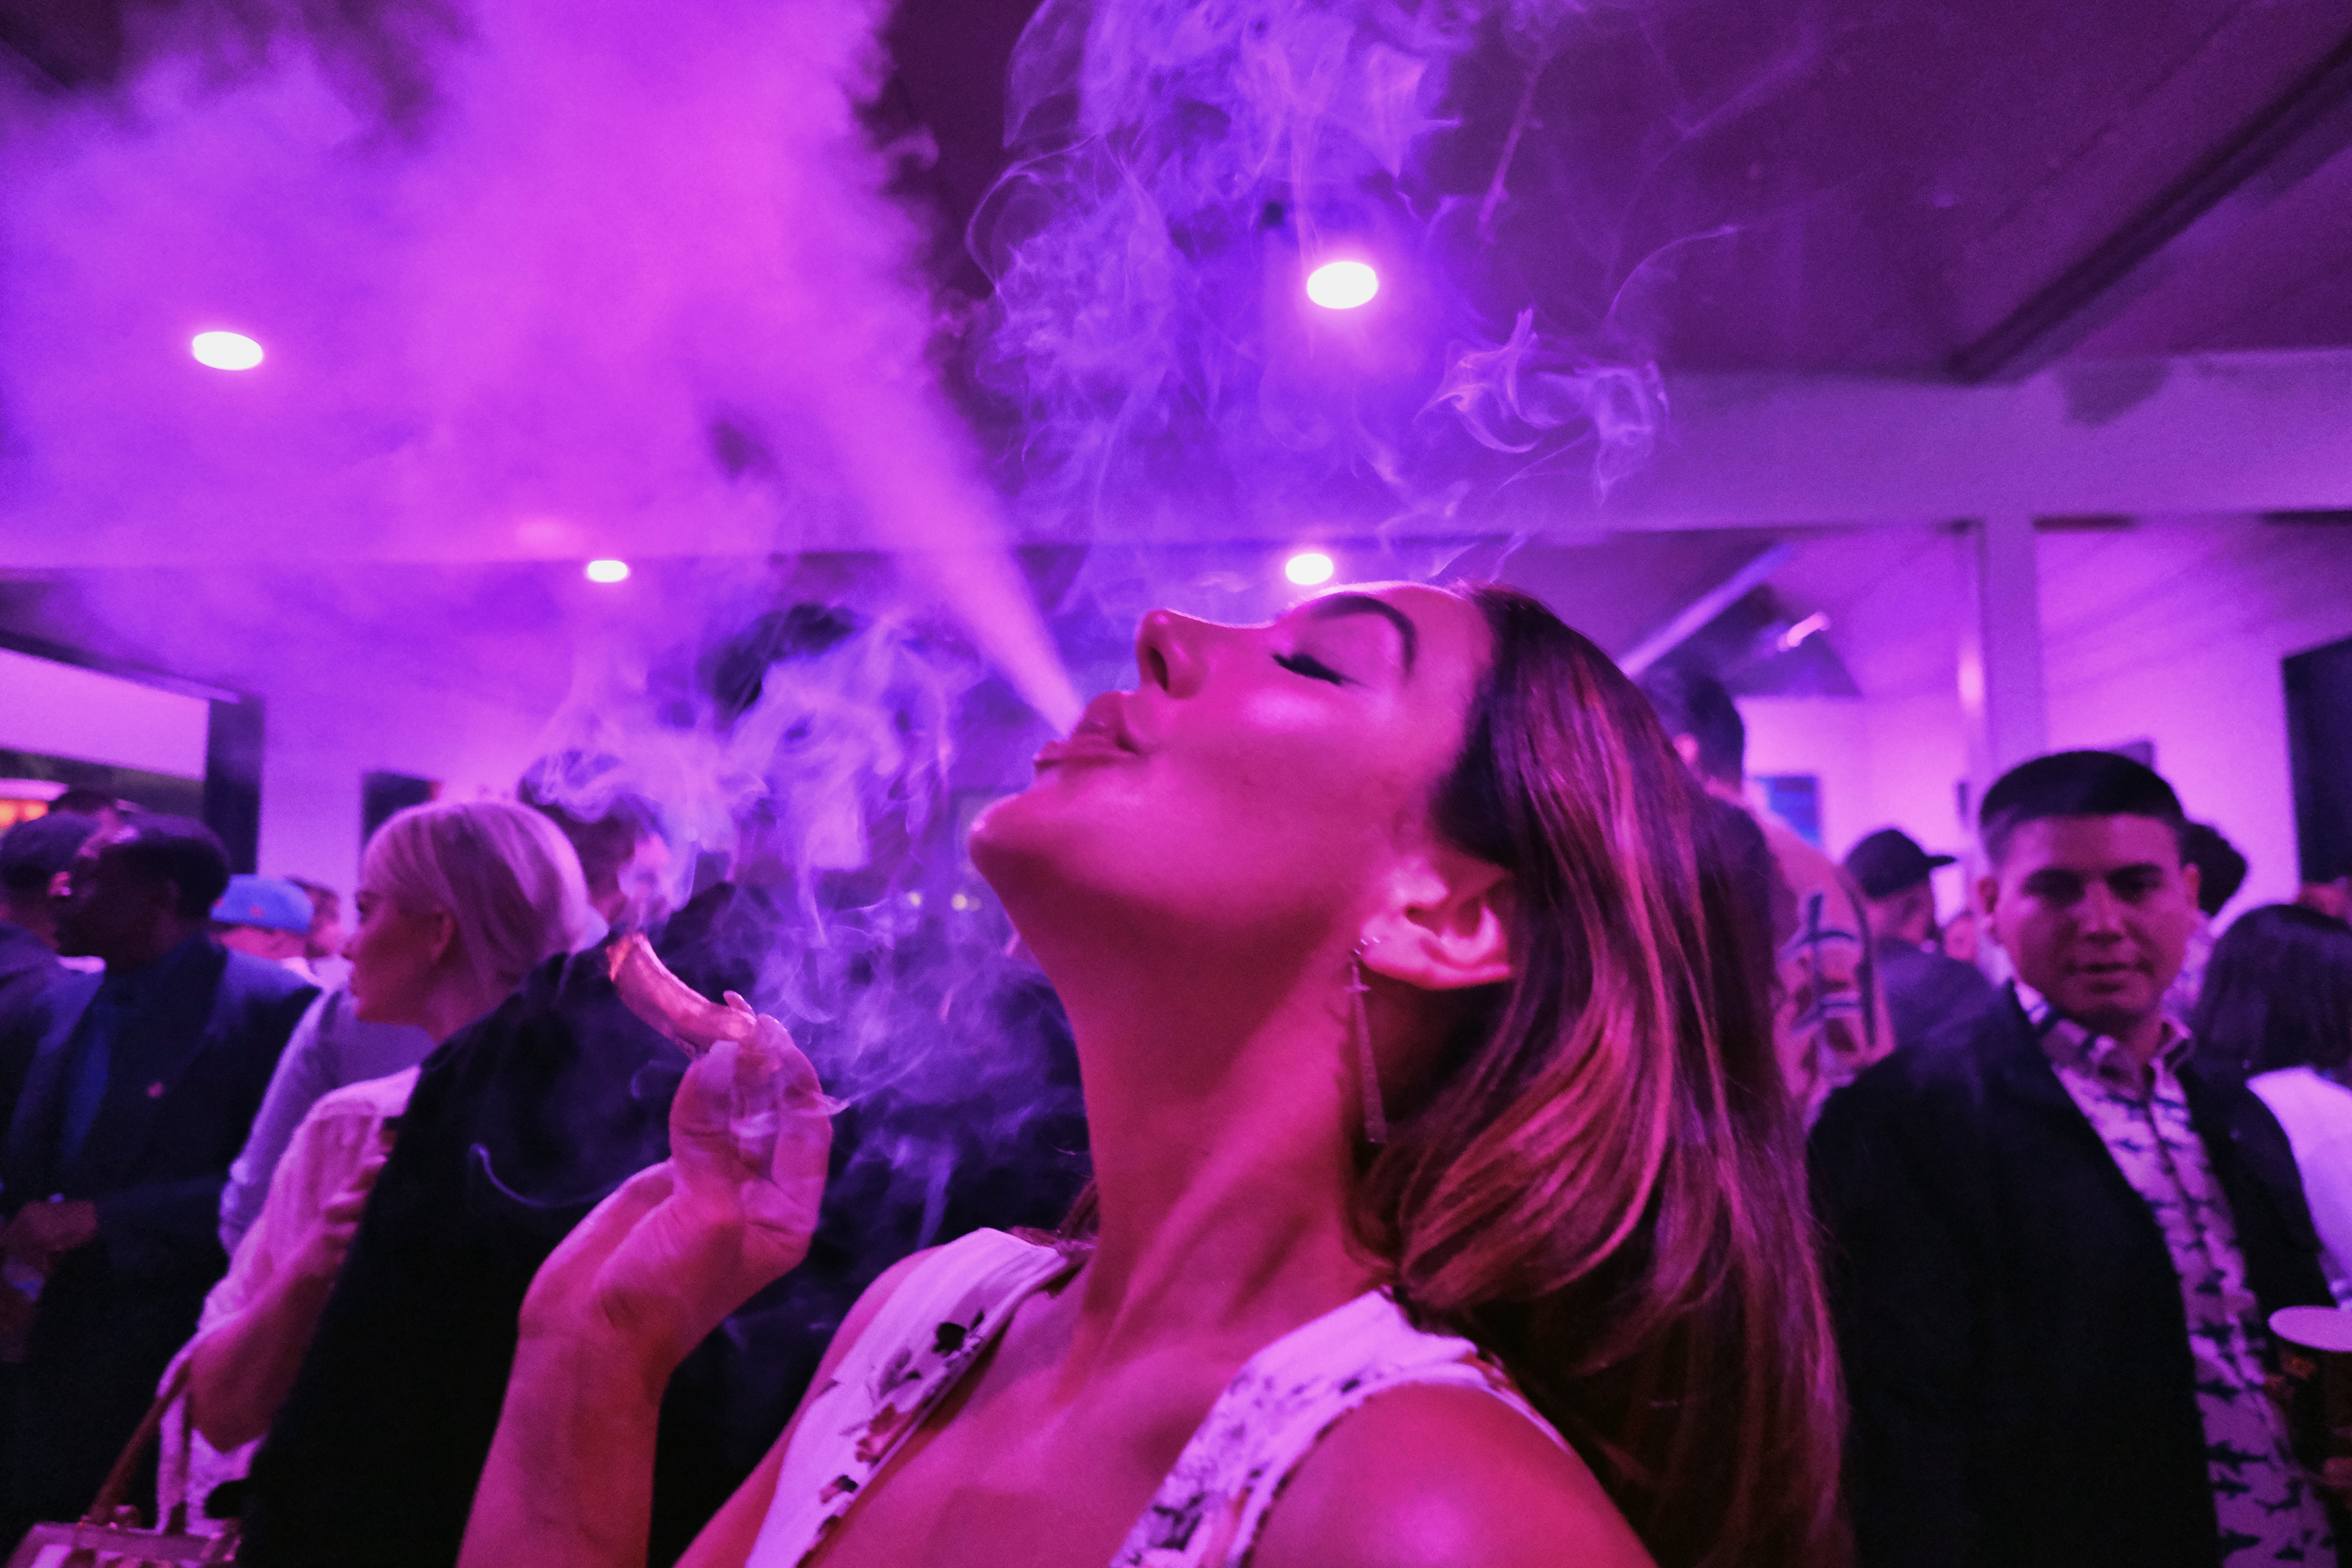 Saturday is 20 April, marking marijuana culture’s high holiday, with cannabis users across the globe set to come together to light up and celebrate 4/20